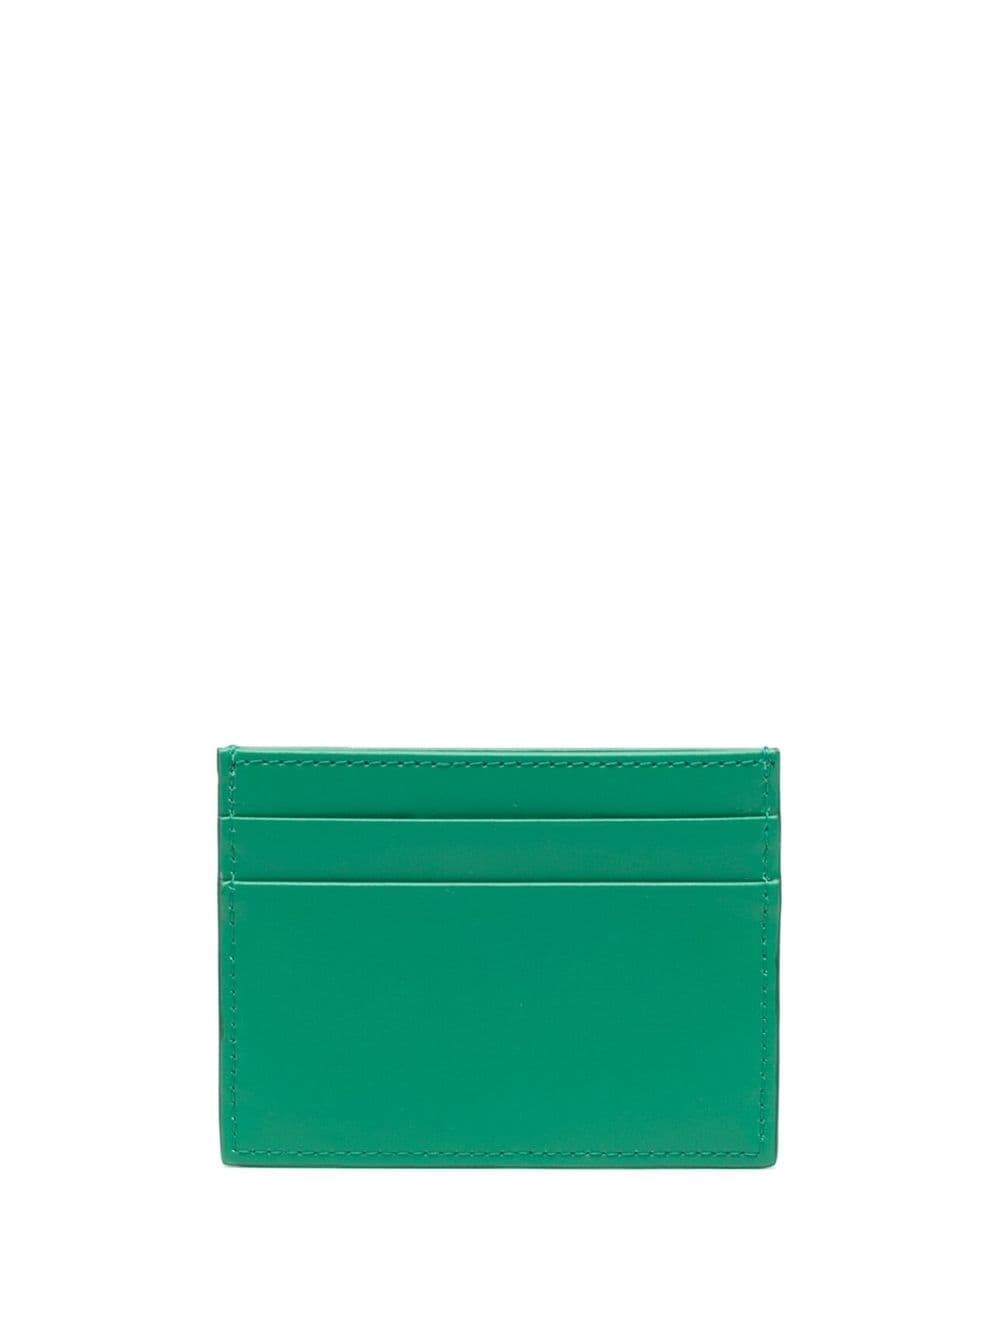 dolce & gabbana CARD HOLDER available on montiboutique.com - 55656